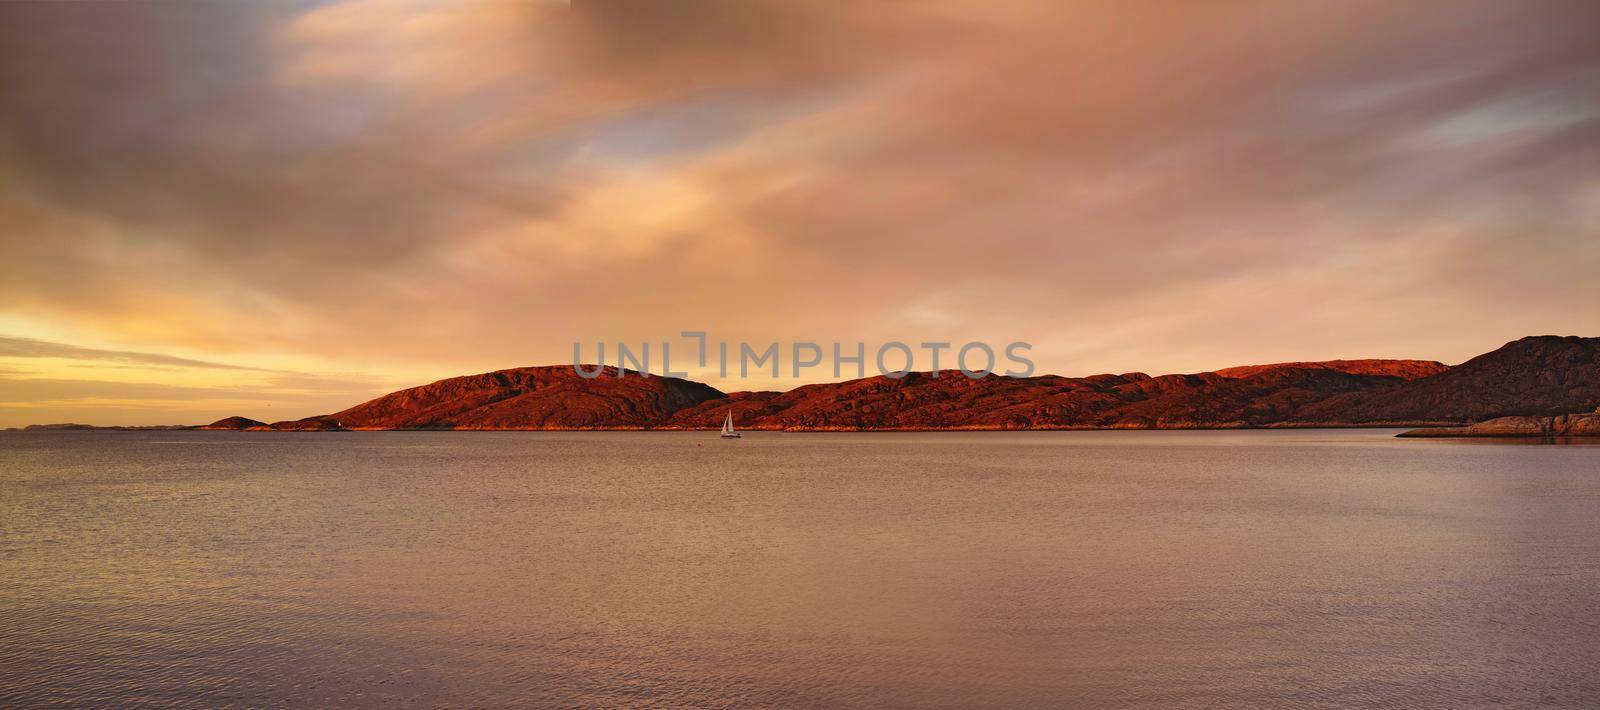 Distant sea landscape near a mountain with a small sailboat in the water. The ocean, beach, or large lake with a boat in the distance near a hill outdoors during sunset on a cloudy day.